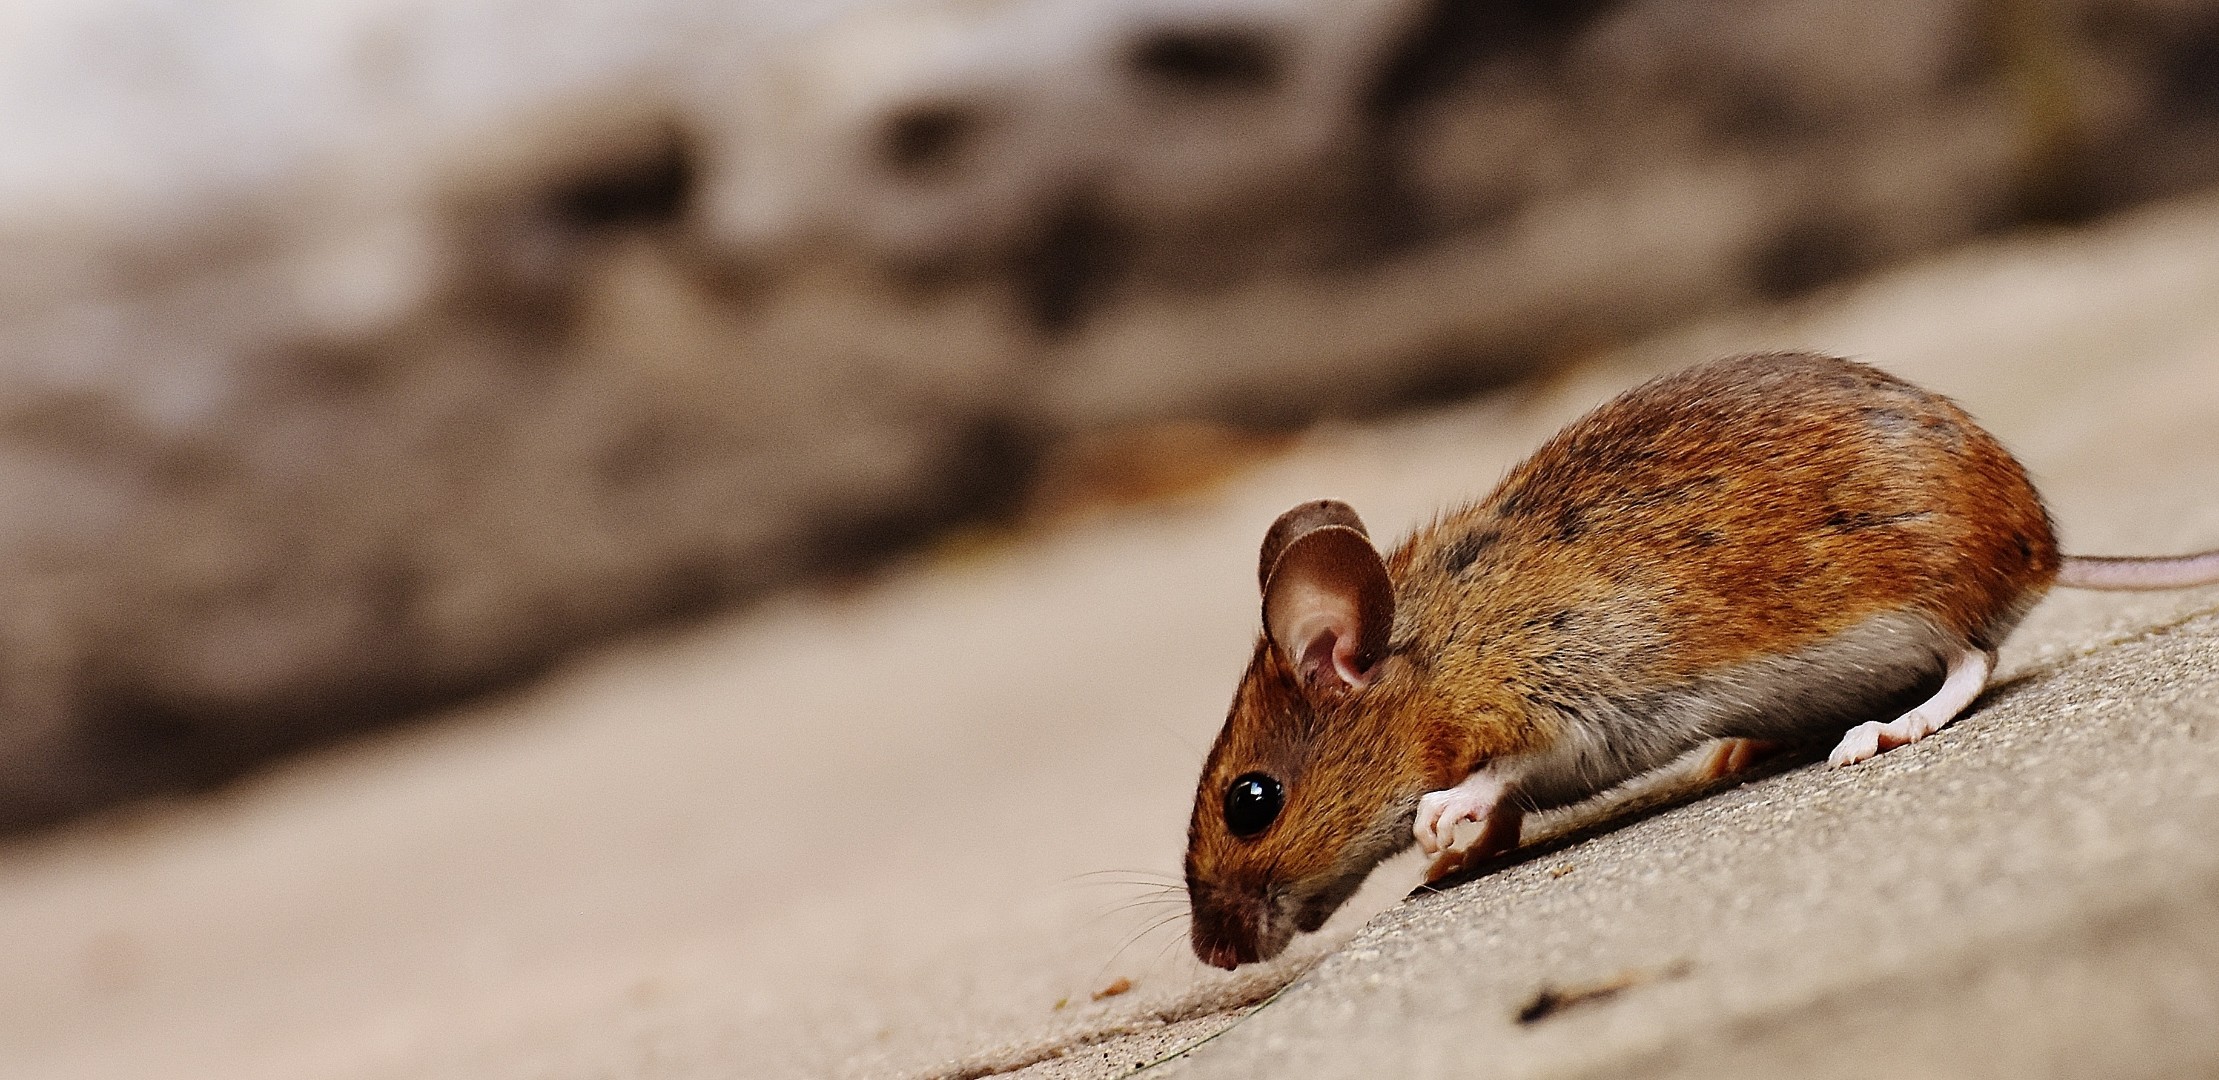 How to Get Rid of Mice in Your Home: 5 Important Steps